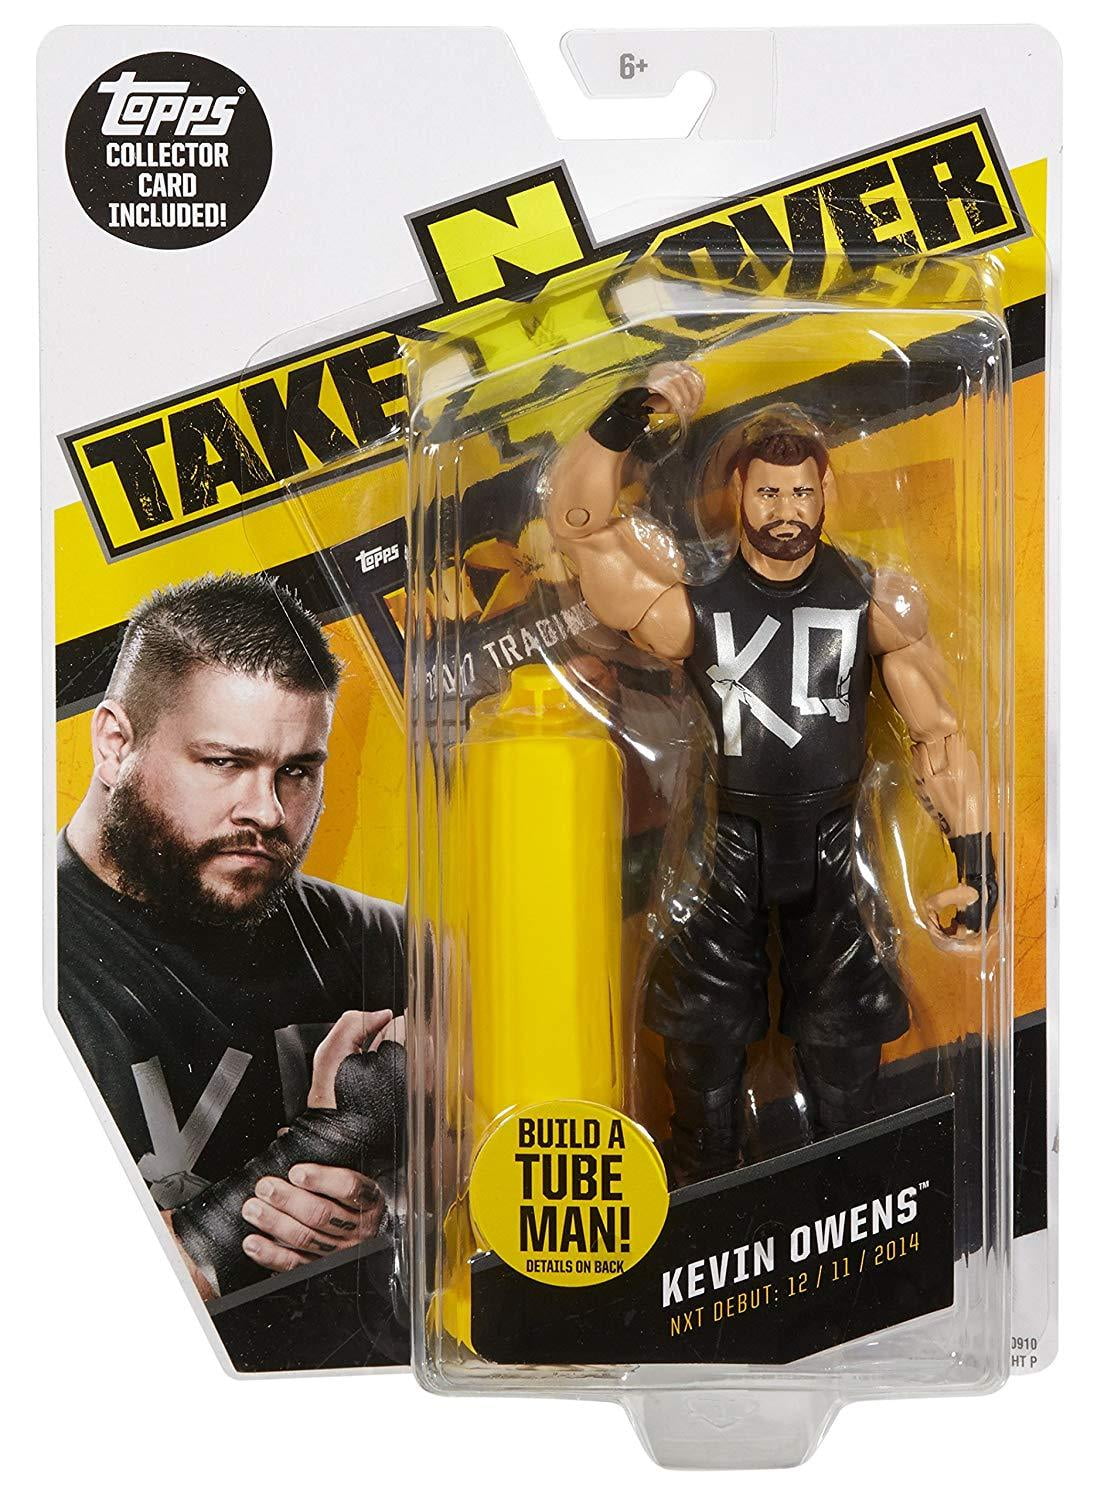 Kevin Owens WWE NXT Takeover Series 58 Figure Target Mattel 2017 for sale online 